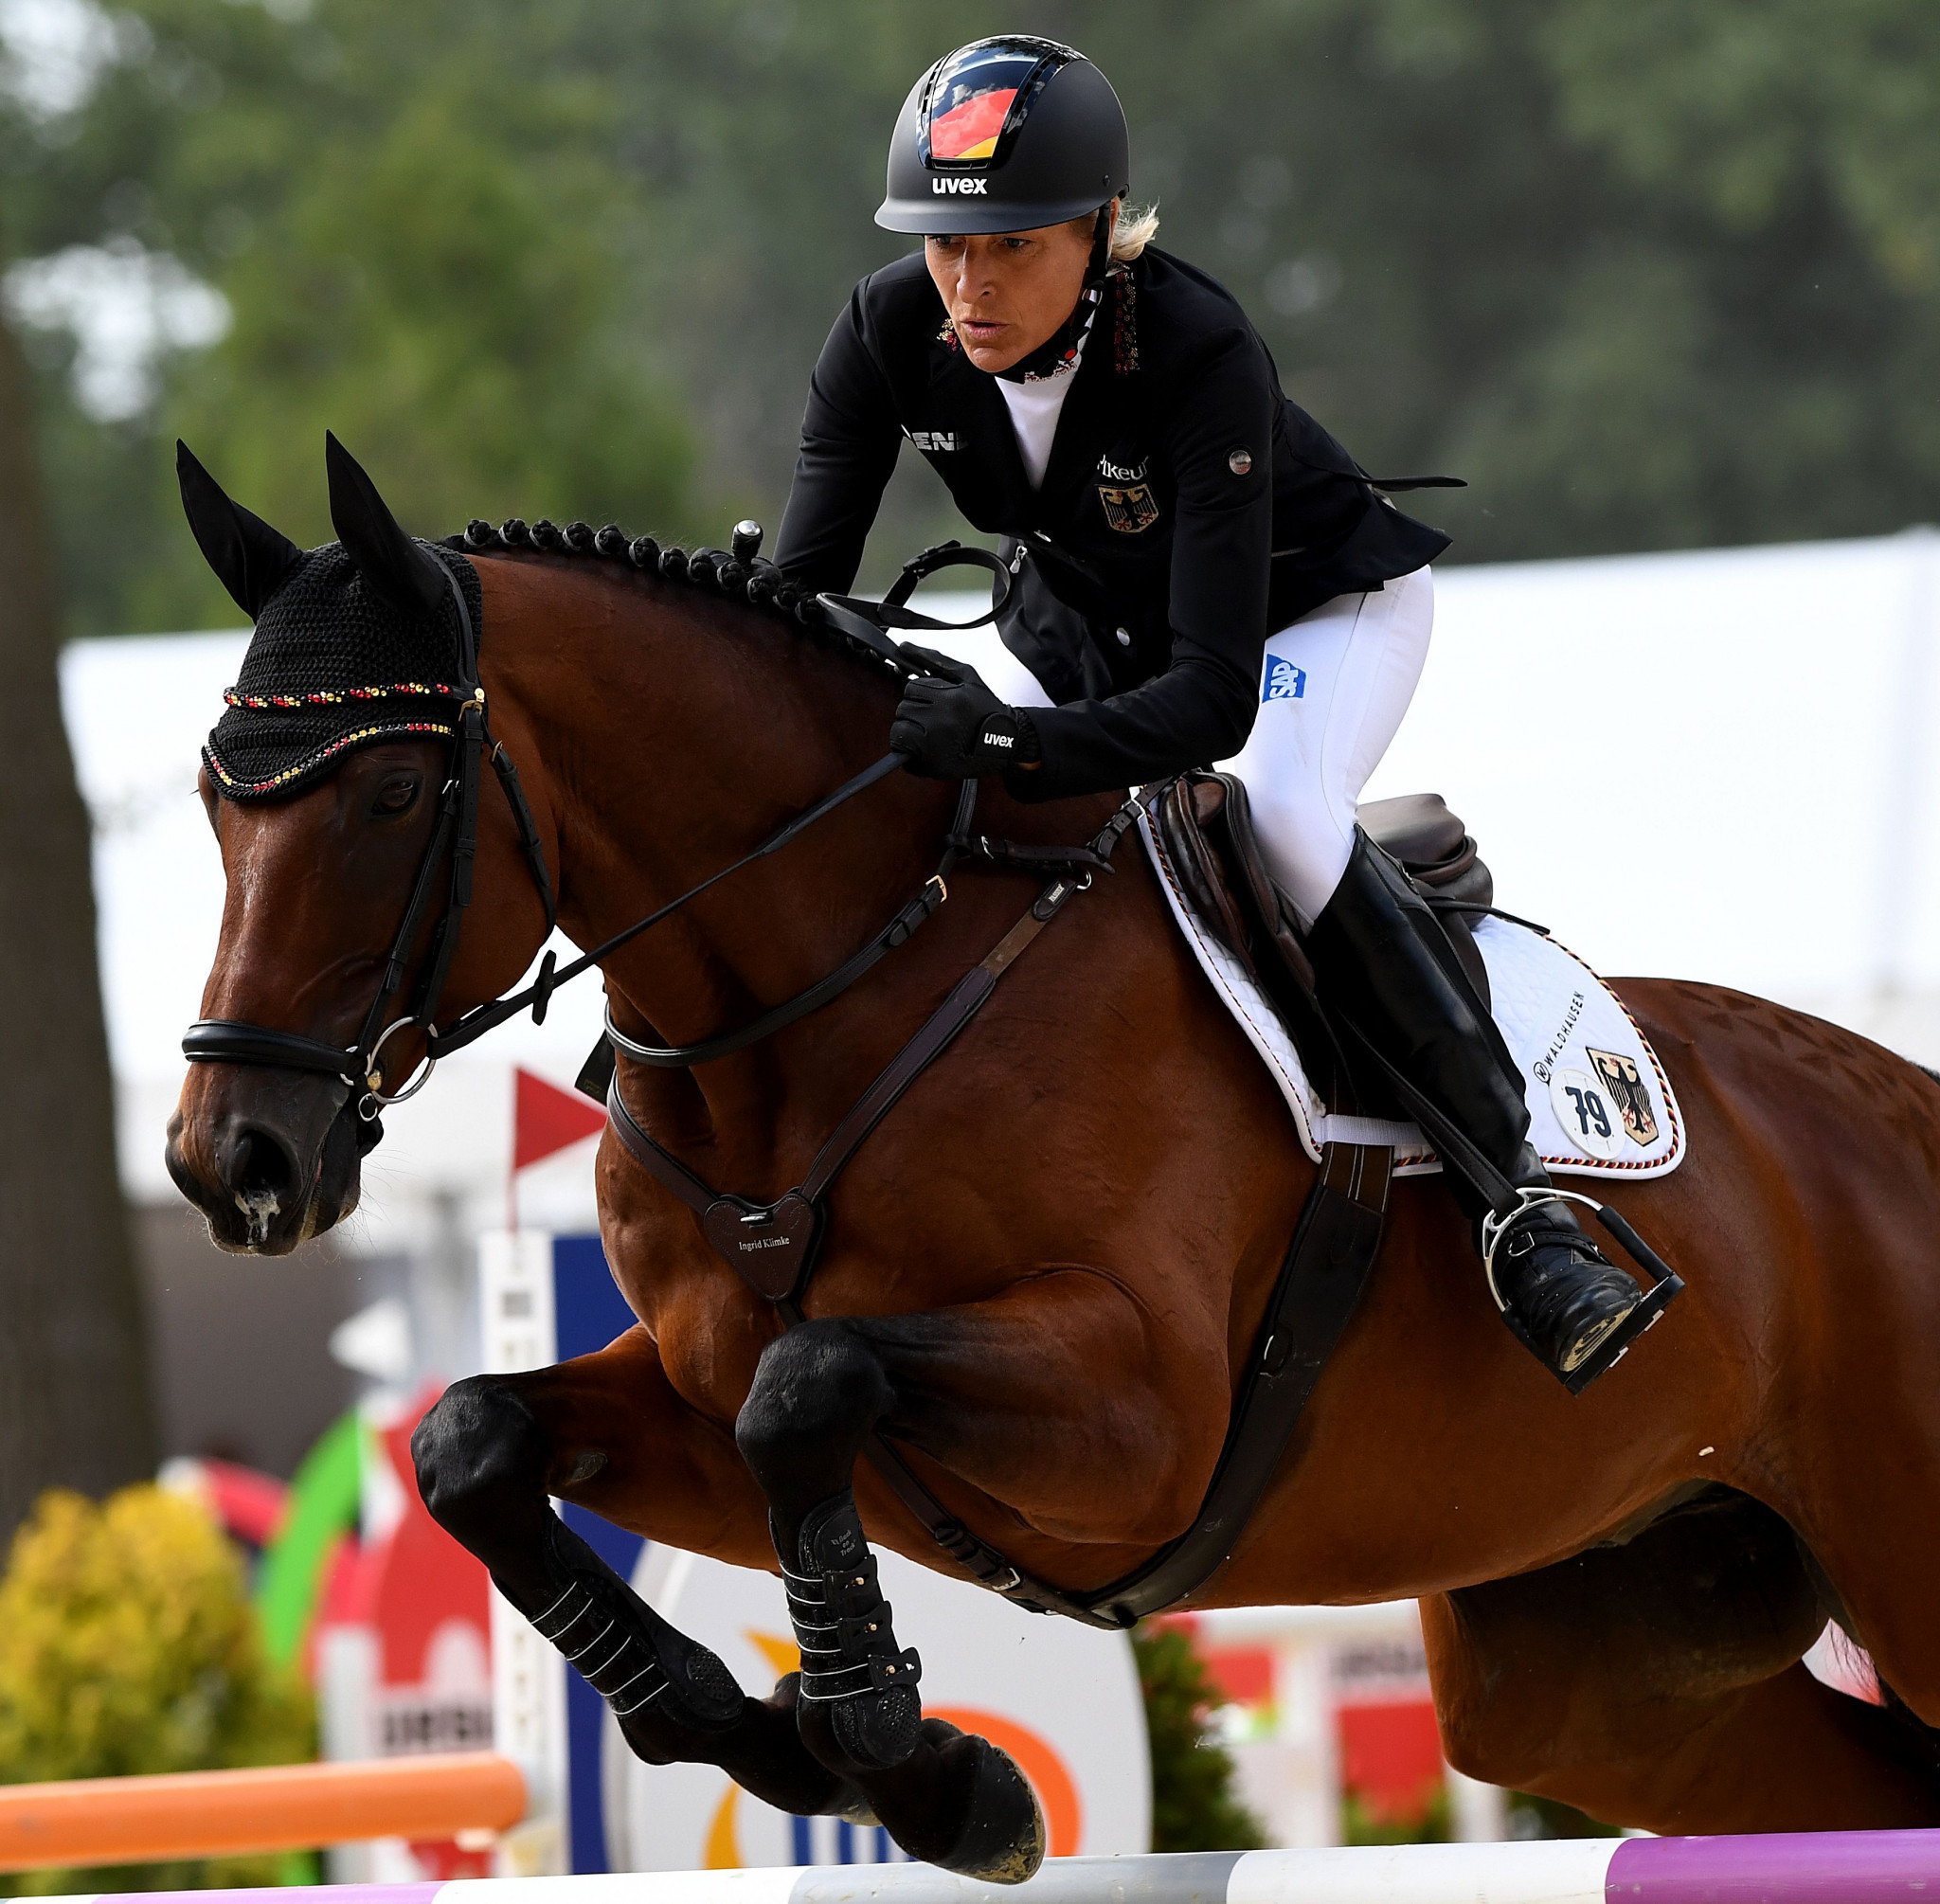 Germany will look to continue their good form in the FEI Eventing  Nations Cup after winning at Houghton Hall ©Getty Images